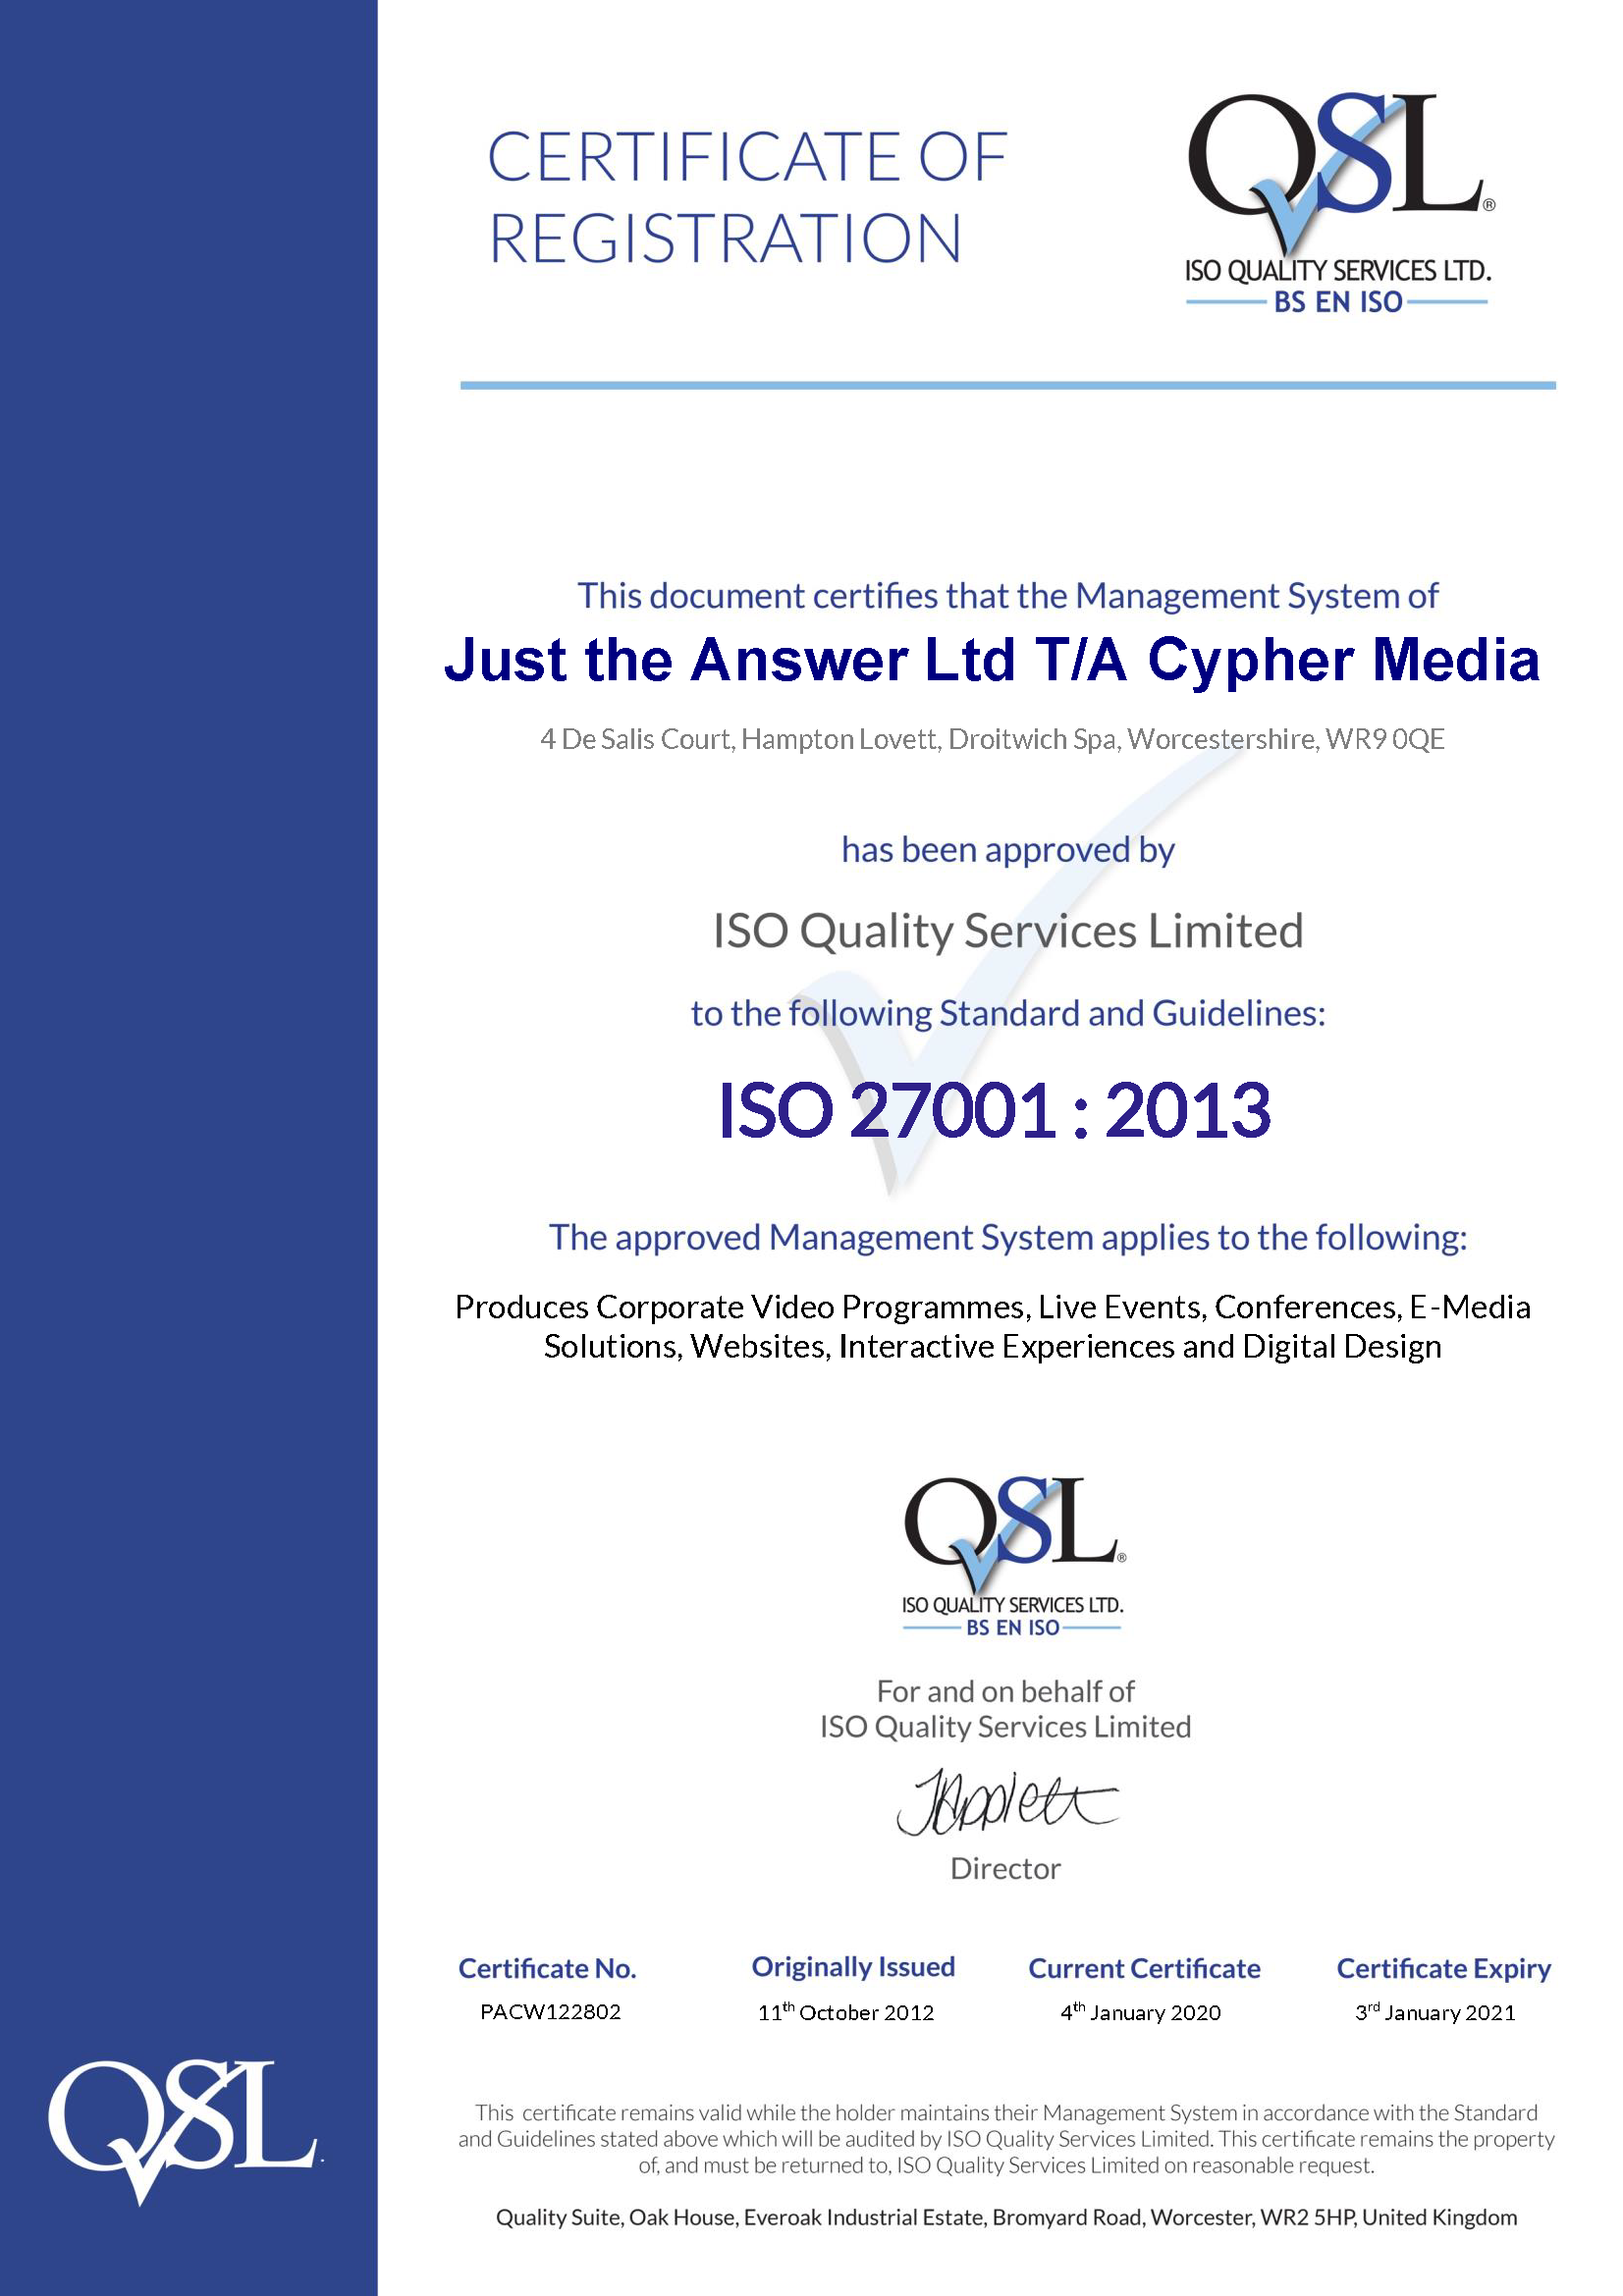 We're ISO 27001 re-certified!